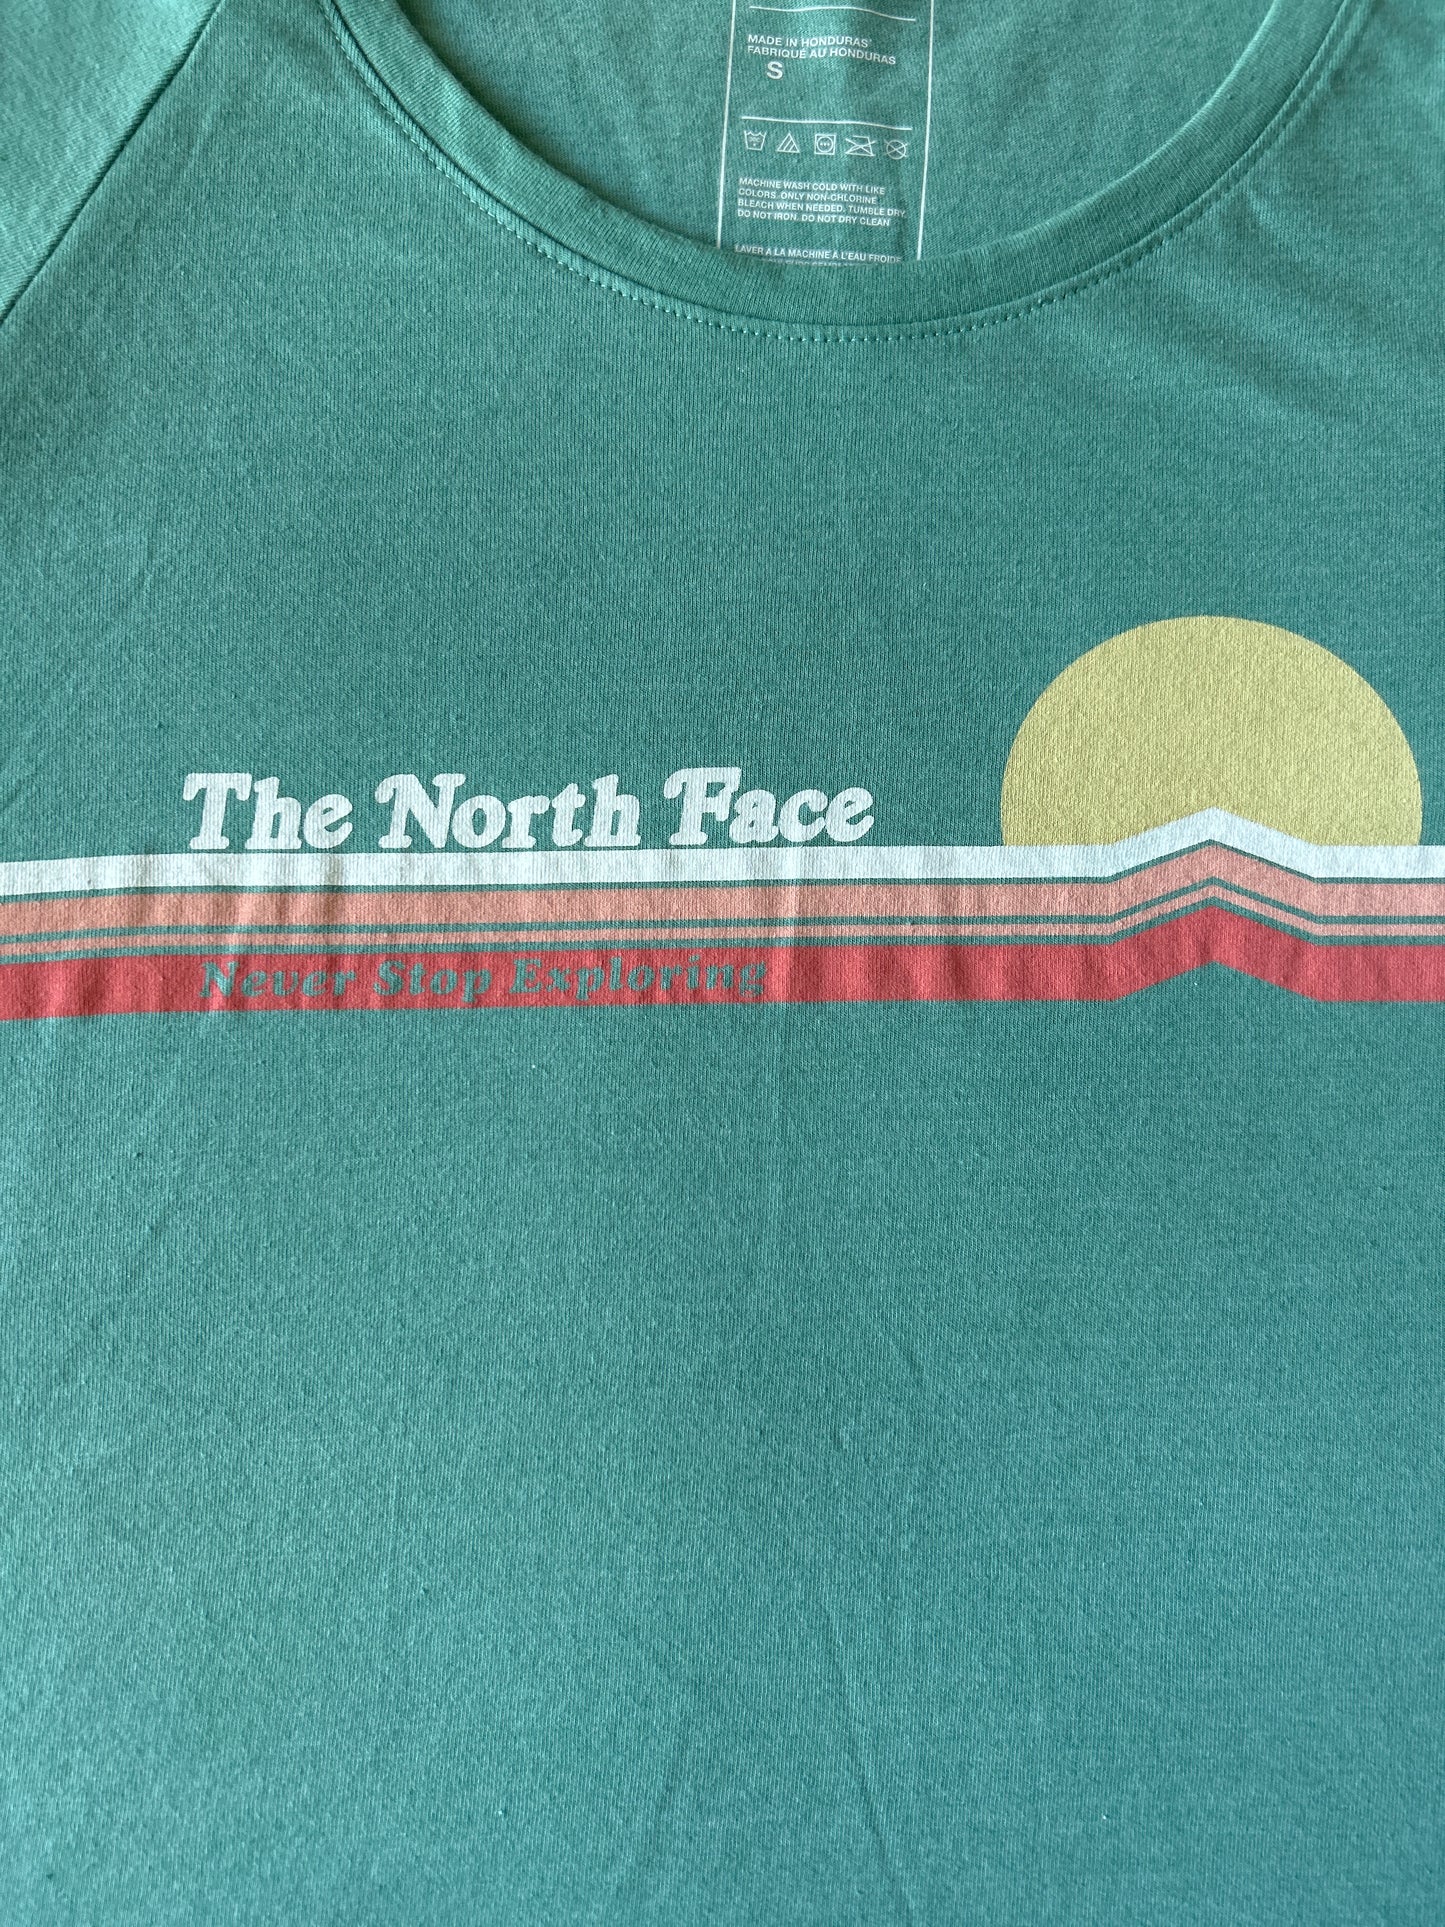 The North Face/NWOT Women’s Tee/Size S